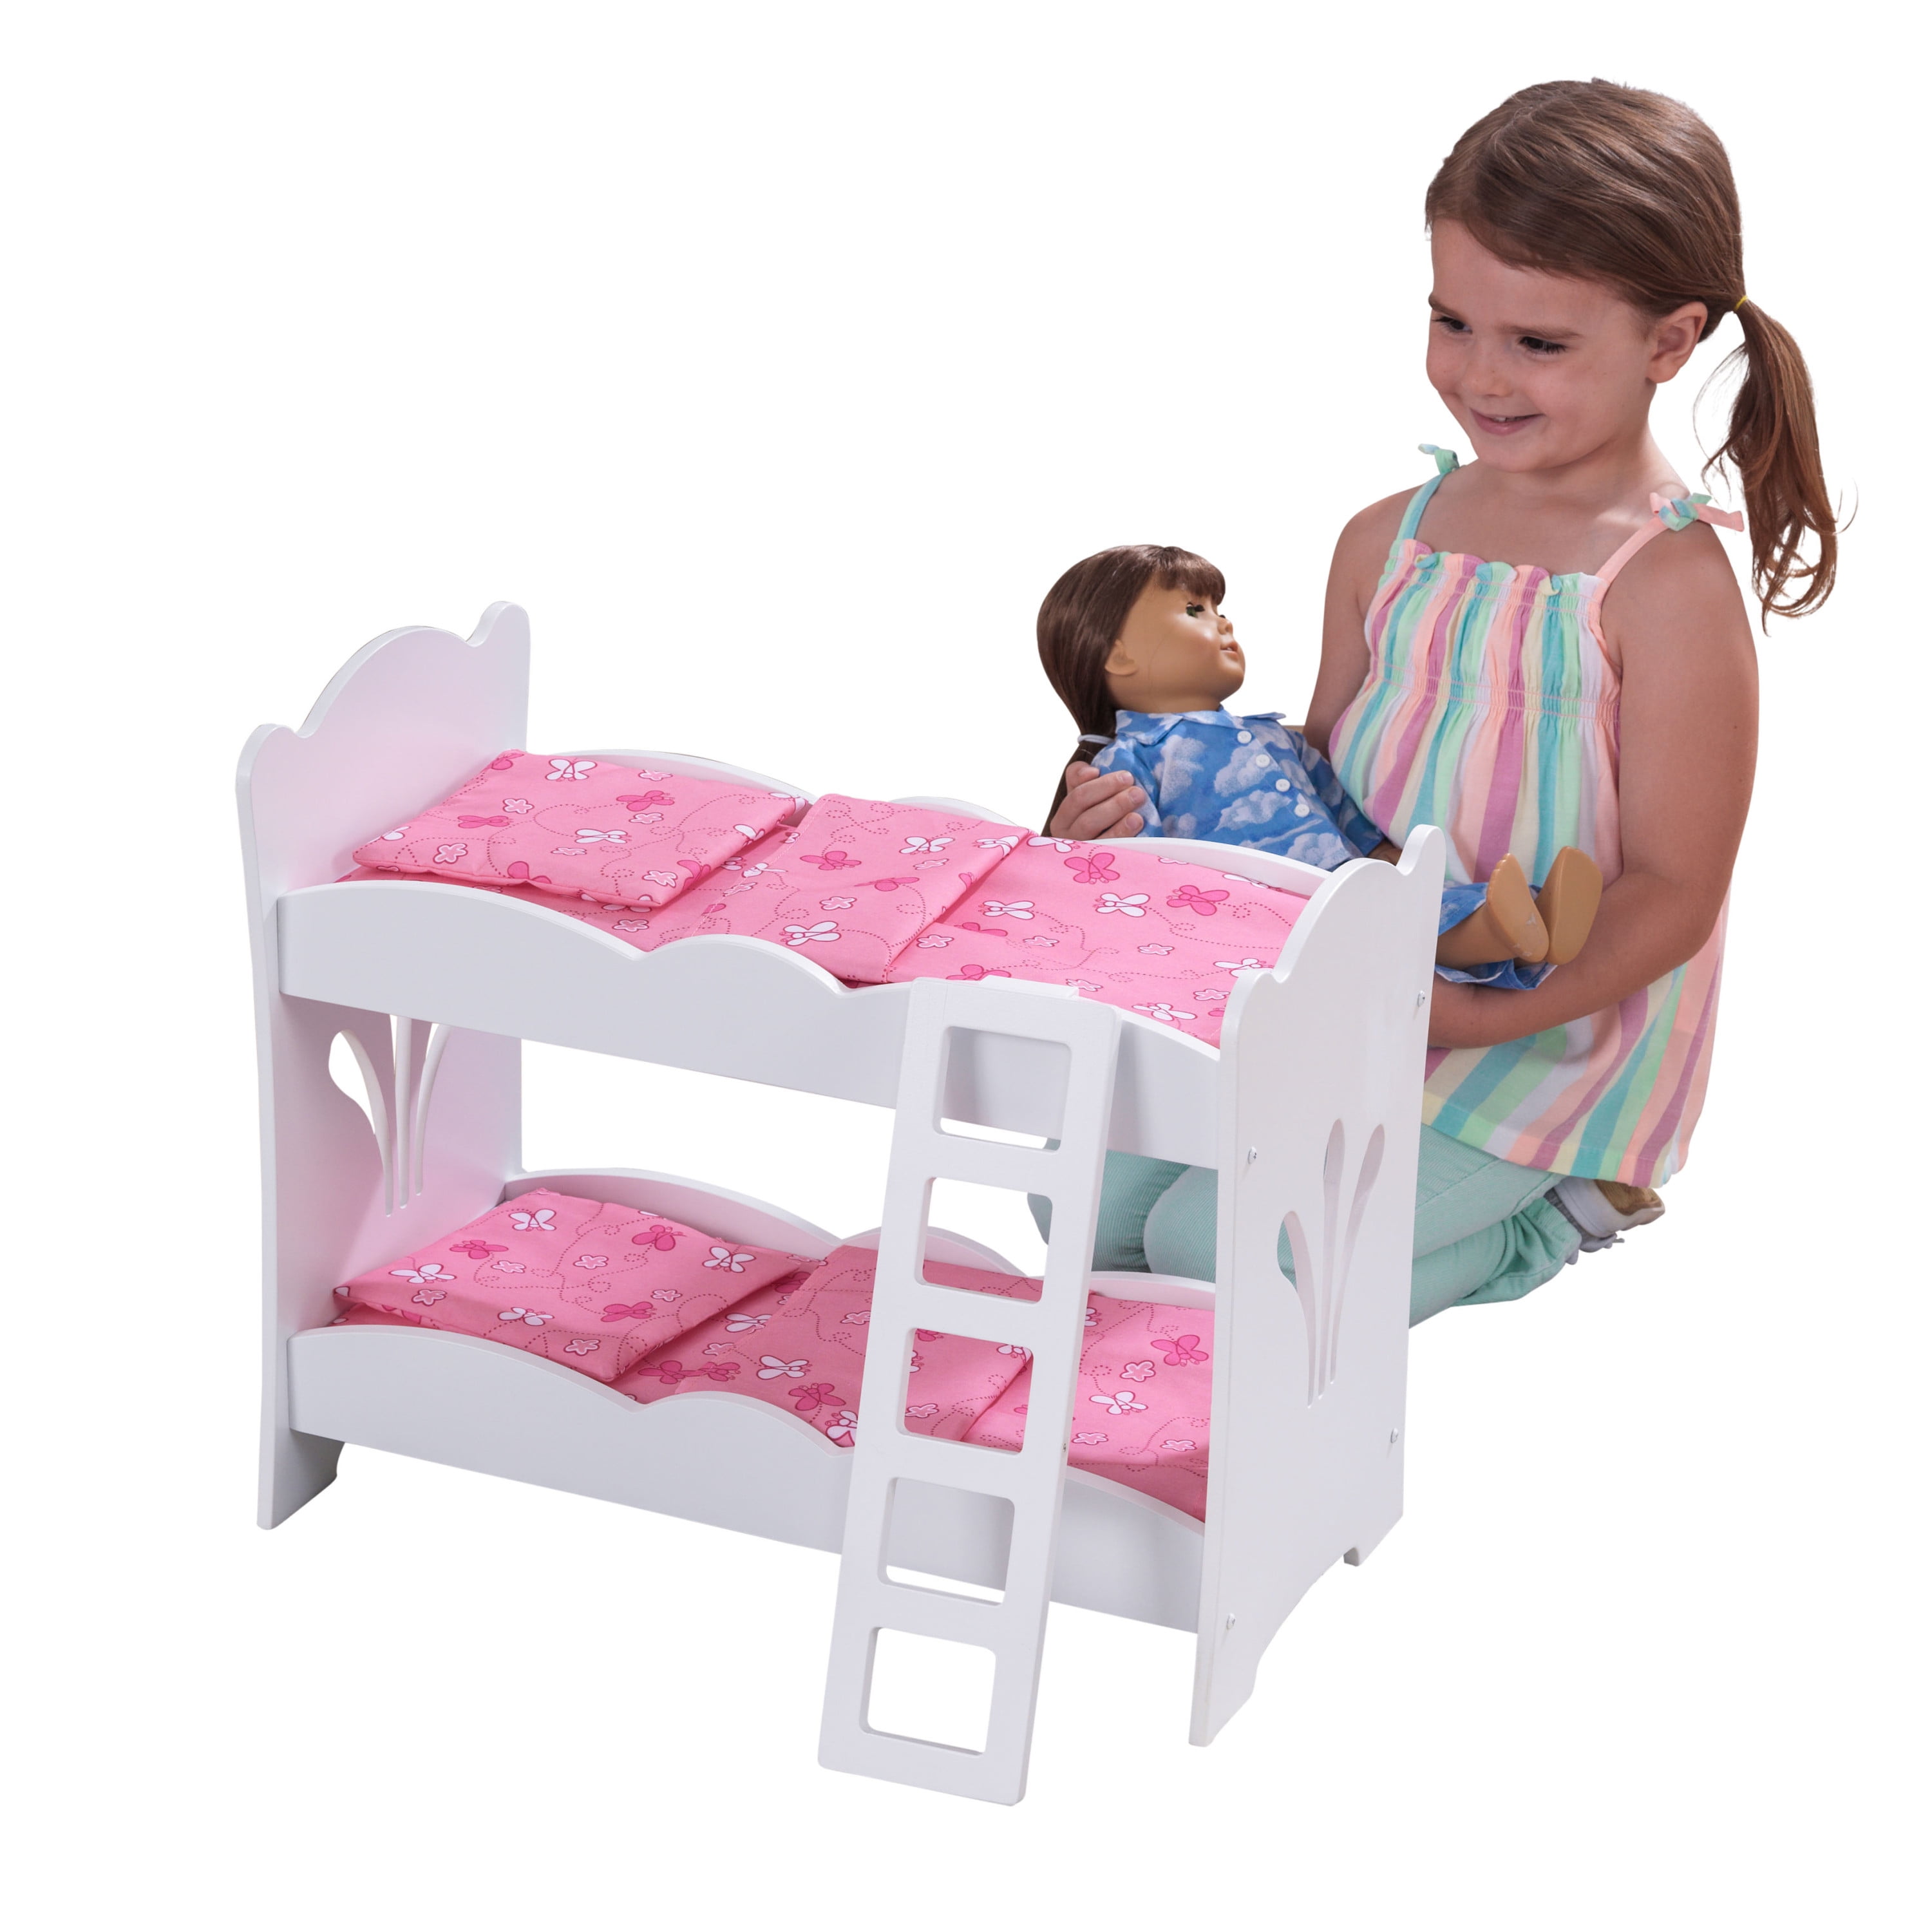 Kidkraft Wooden Lil Doll Bunk Bed With, Antique Wooden Doll Bunk Beds